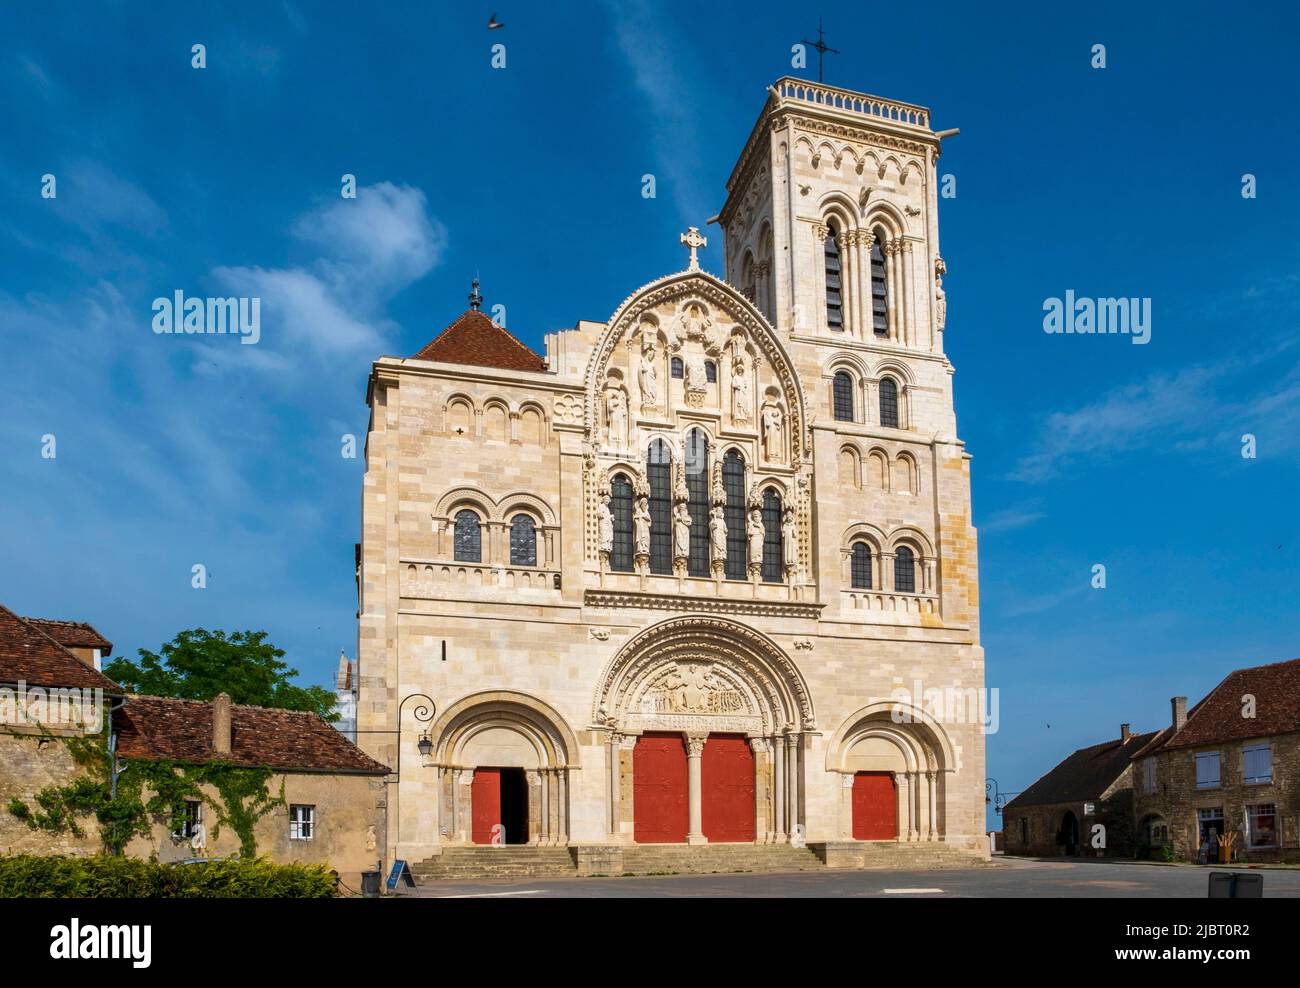 France, Yonne, Morvan regional natural park, Vezelay, a UNESCO World Heritage site, labelled Les Plus Beaux Villages de France (The most beautiful villages of France), starting point of one of the main ways to Santiago de Compostela (Via Lemovicensis or Vezelay Way), Sainte Marie Madeleine basilica Stock Photo